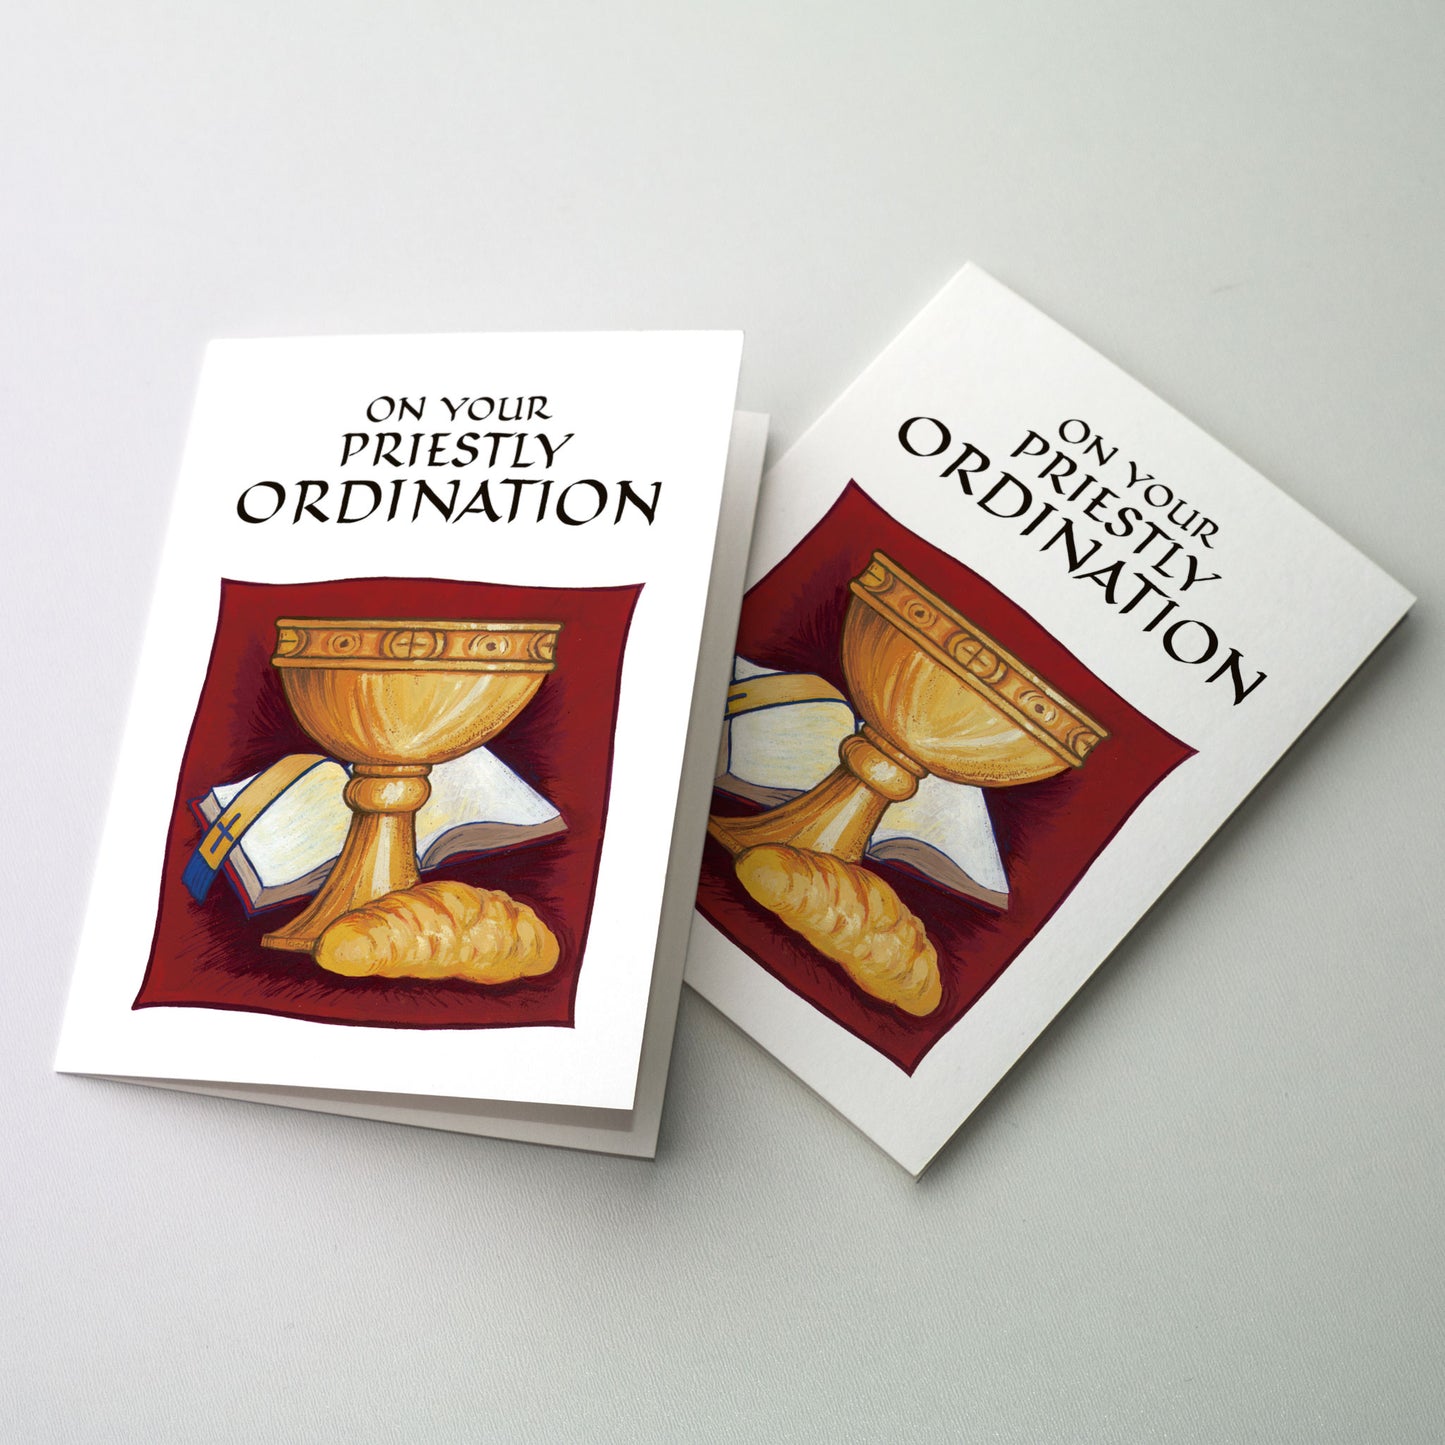 On Your Priestly Ordination - Ordination Congratulations Card